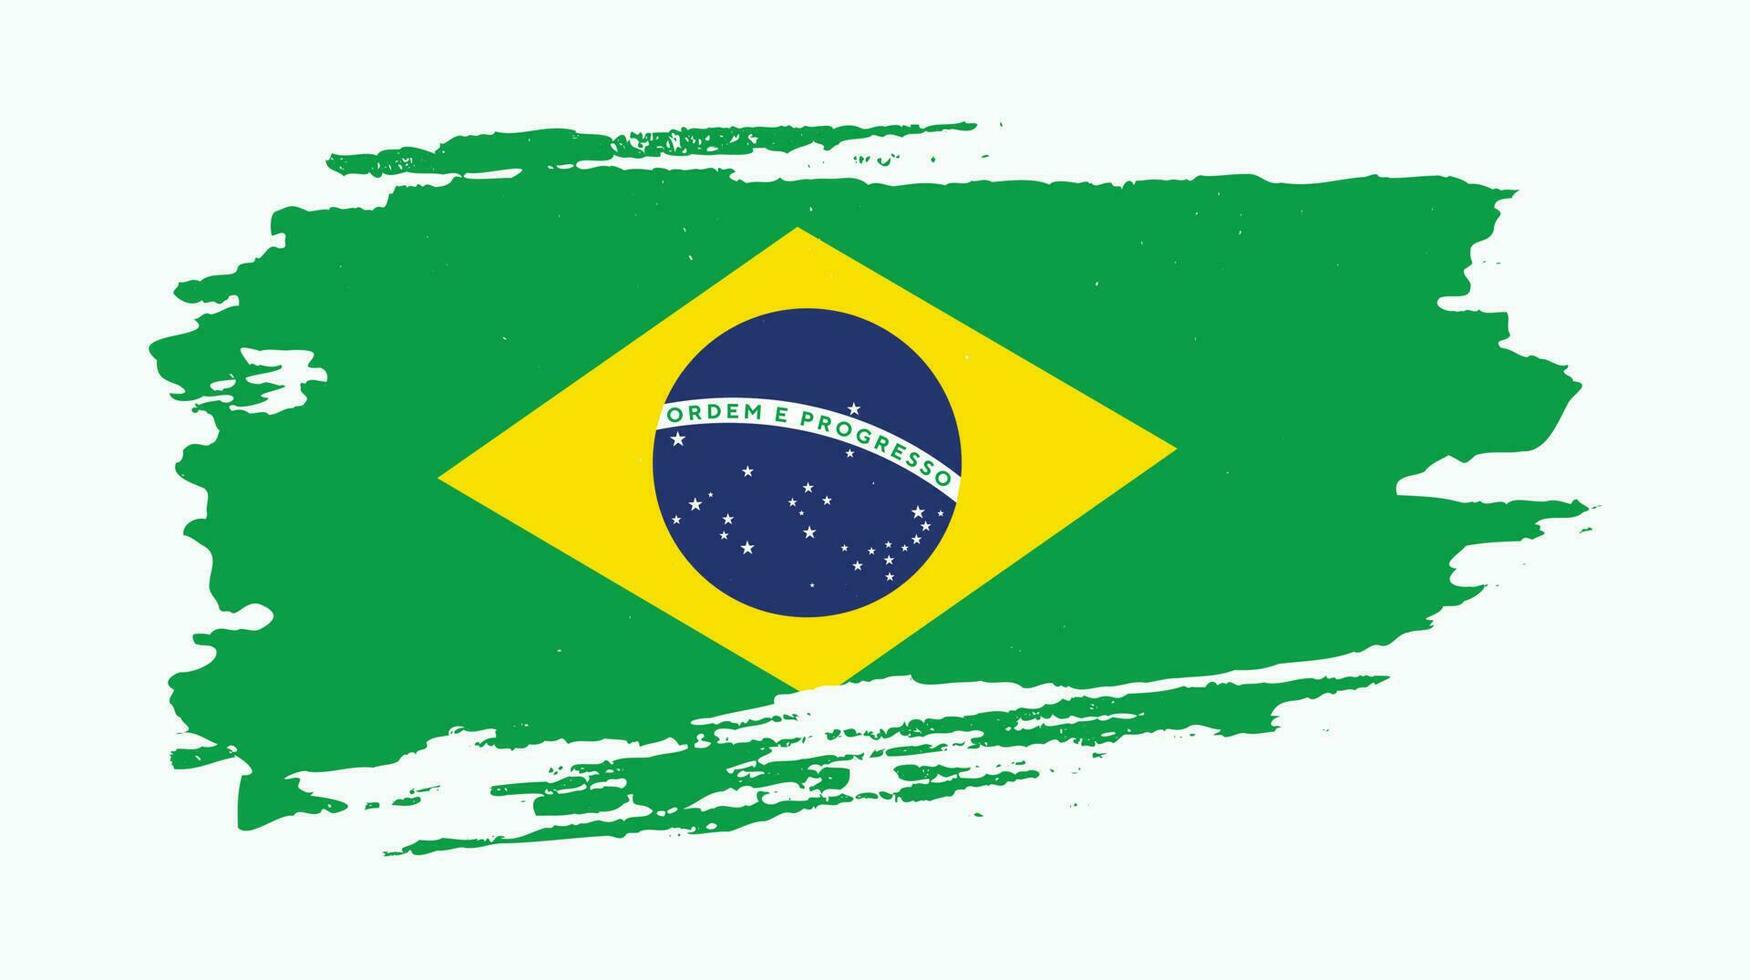 New faded grunge texture vintage Brazil flag vector